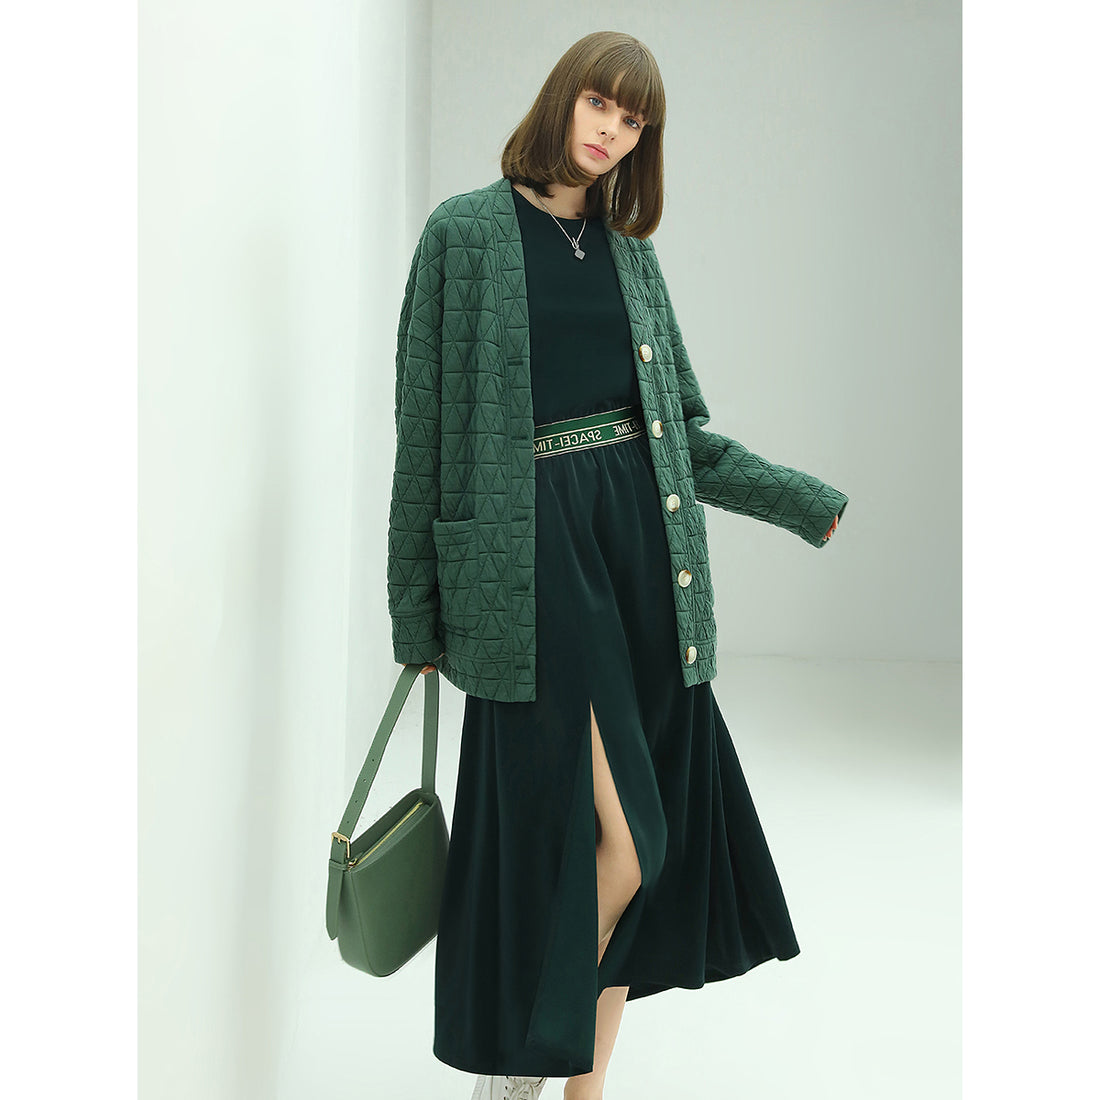 floor-length-liquid-green-dress-with-capped-sleeves_all_green_2.jpg